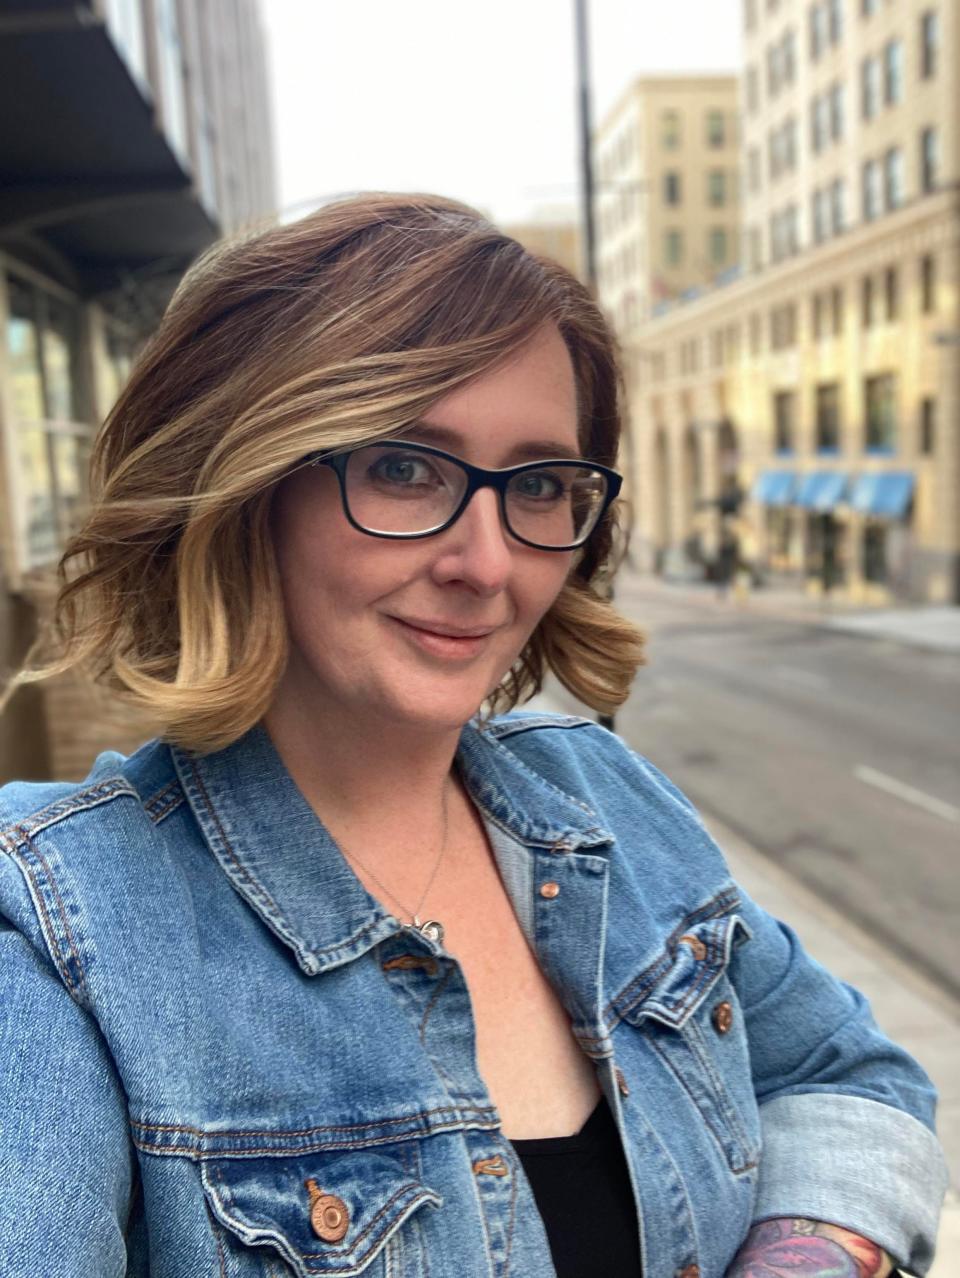 Amy Parker started the support group for peer recovery supporters in Cincinnati. The group later expanded and evolved into On the Front Lines, a 24-7 chat linking recovery professionals who help each other get help and break down barriers to treatment and assistance for people with substance use disorders.